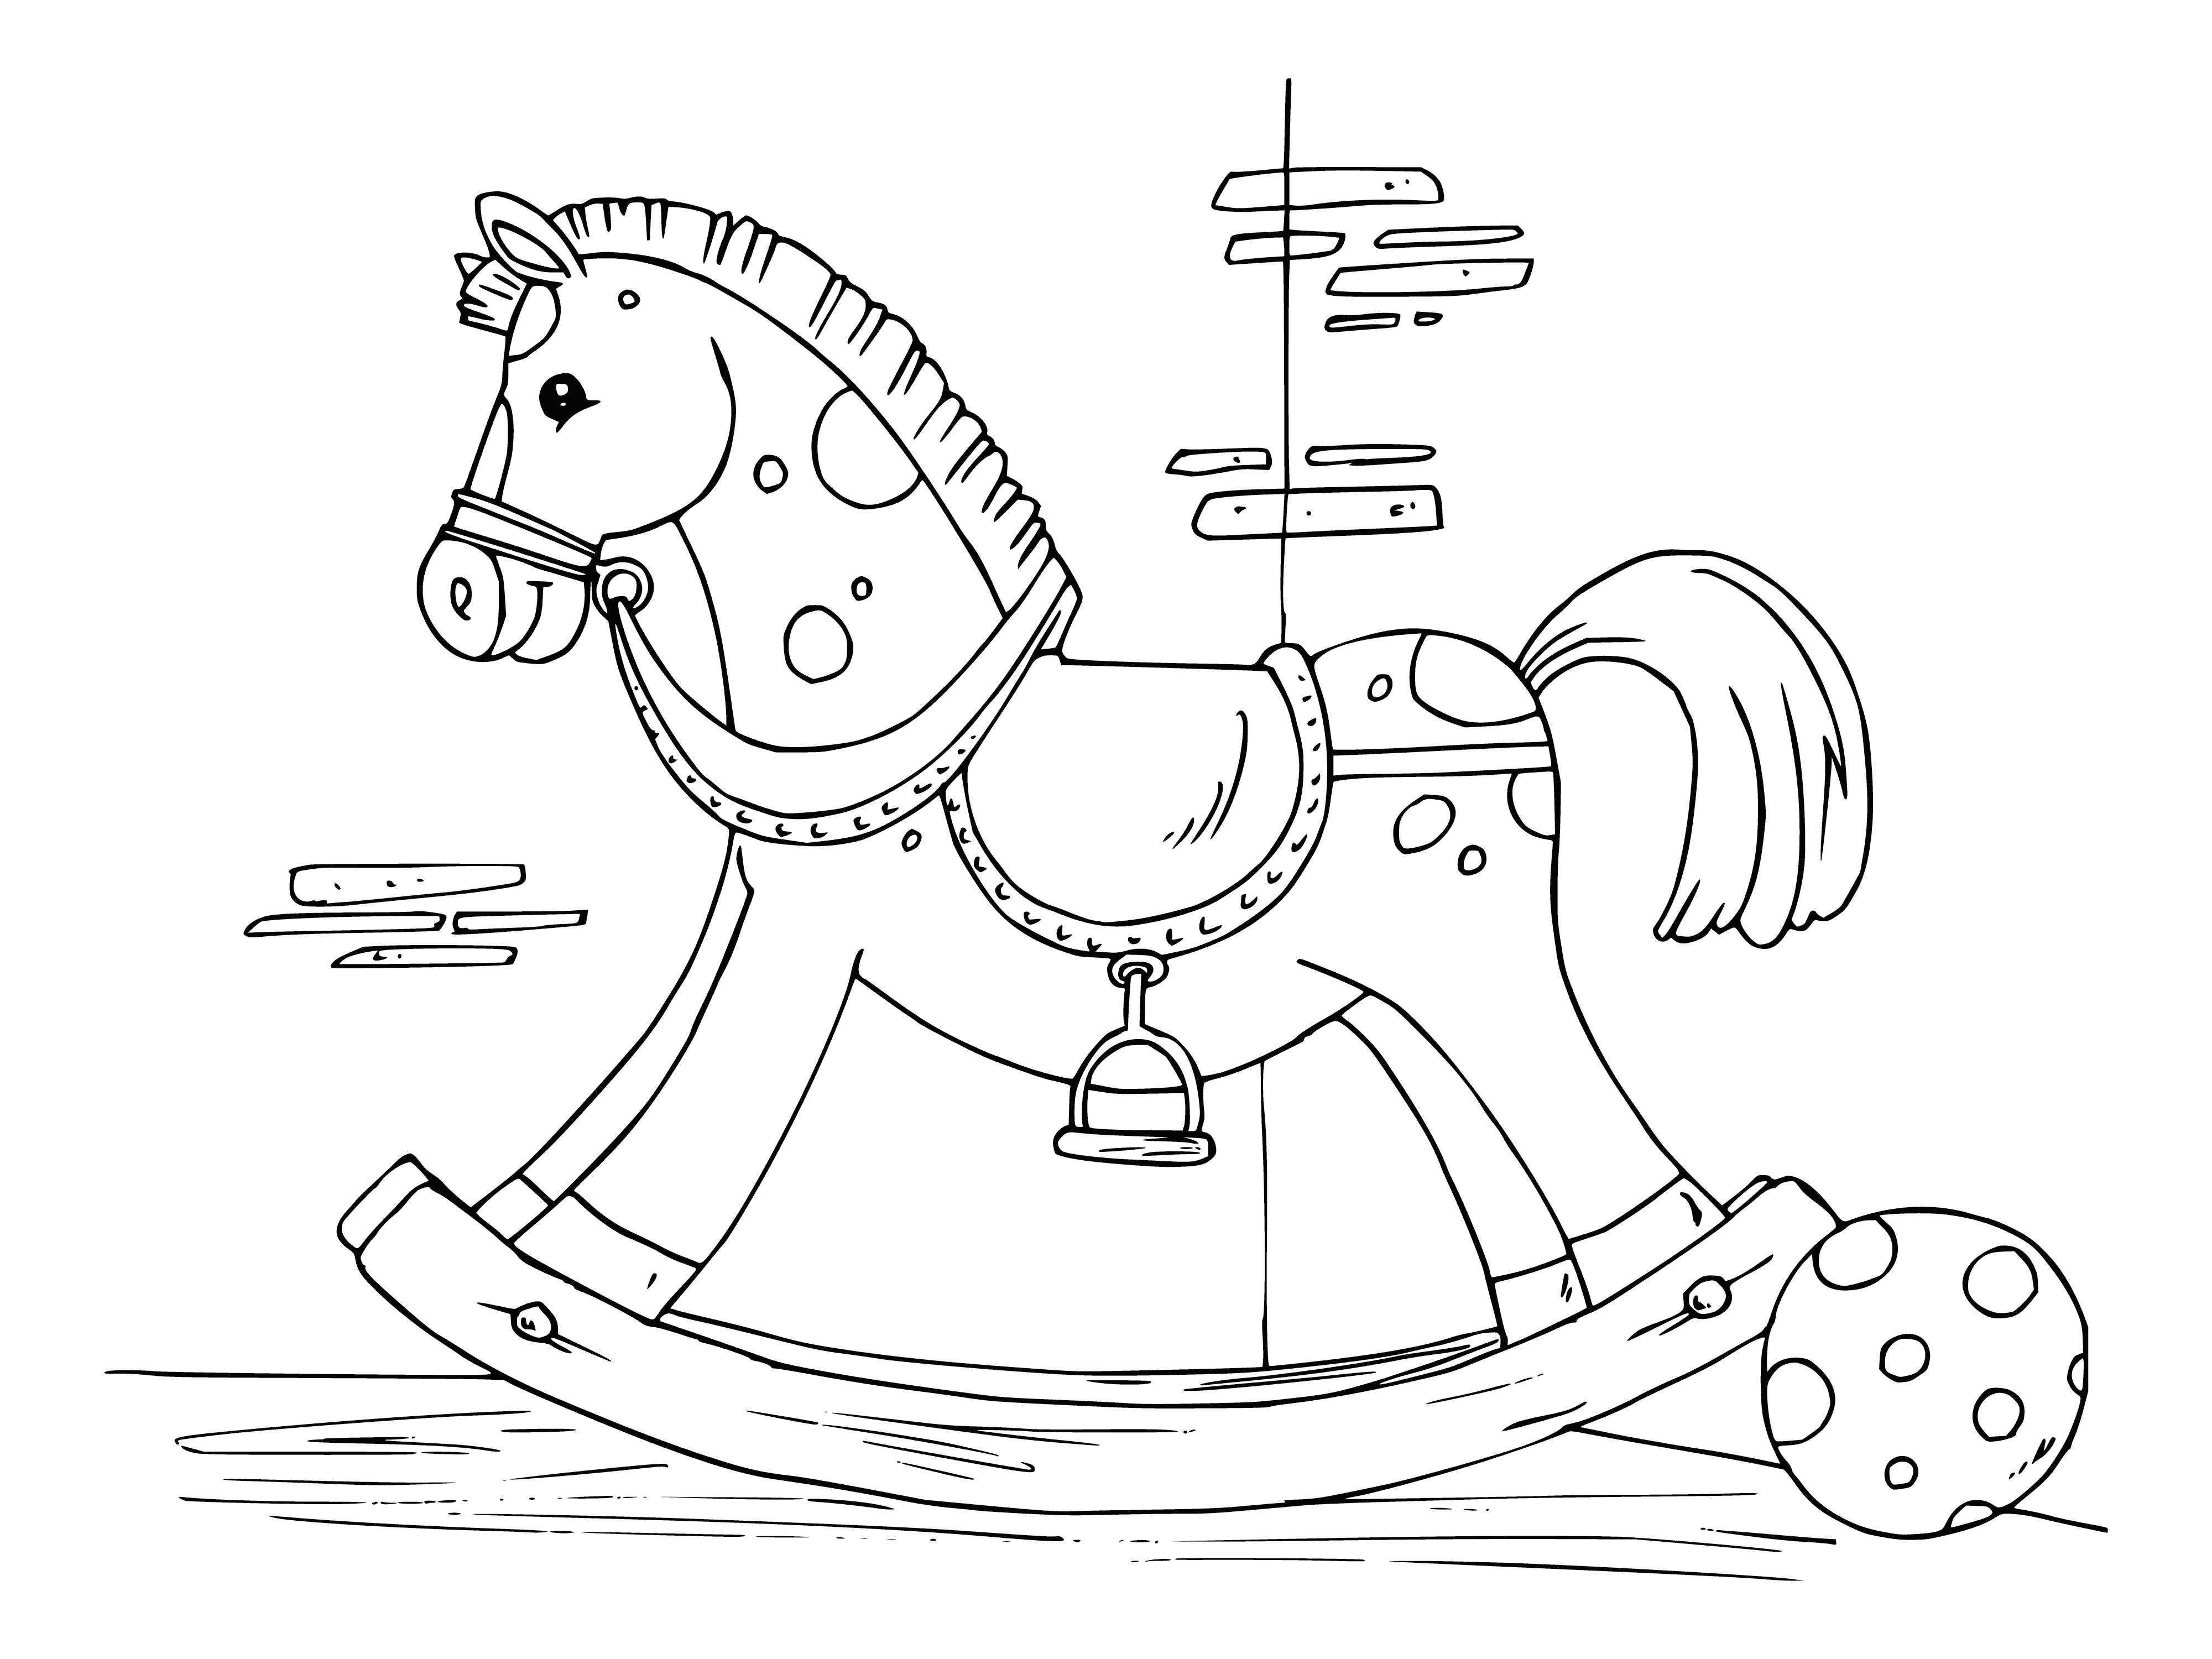 coloring page: Child rides horse with long brown mane, deep chestnut coat & gentle brown eyes. Child laughing with delight as they ride, gripping reins tightly.